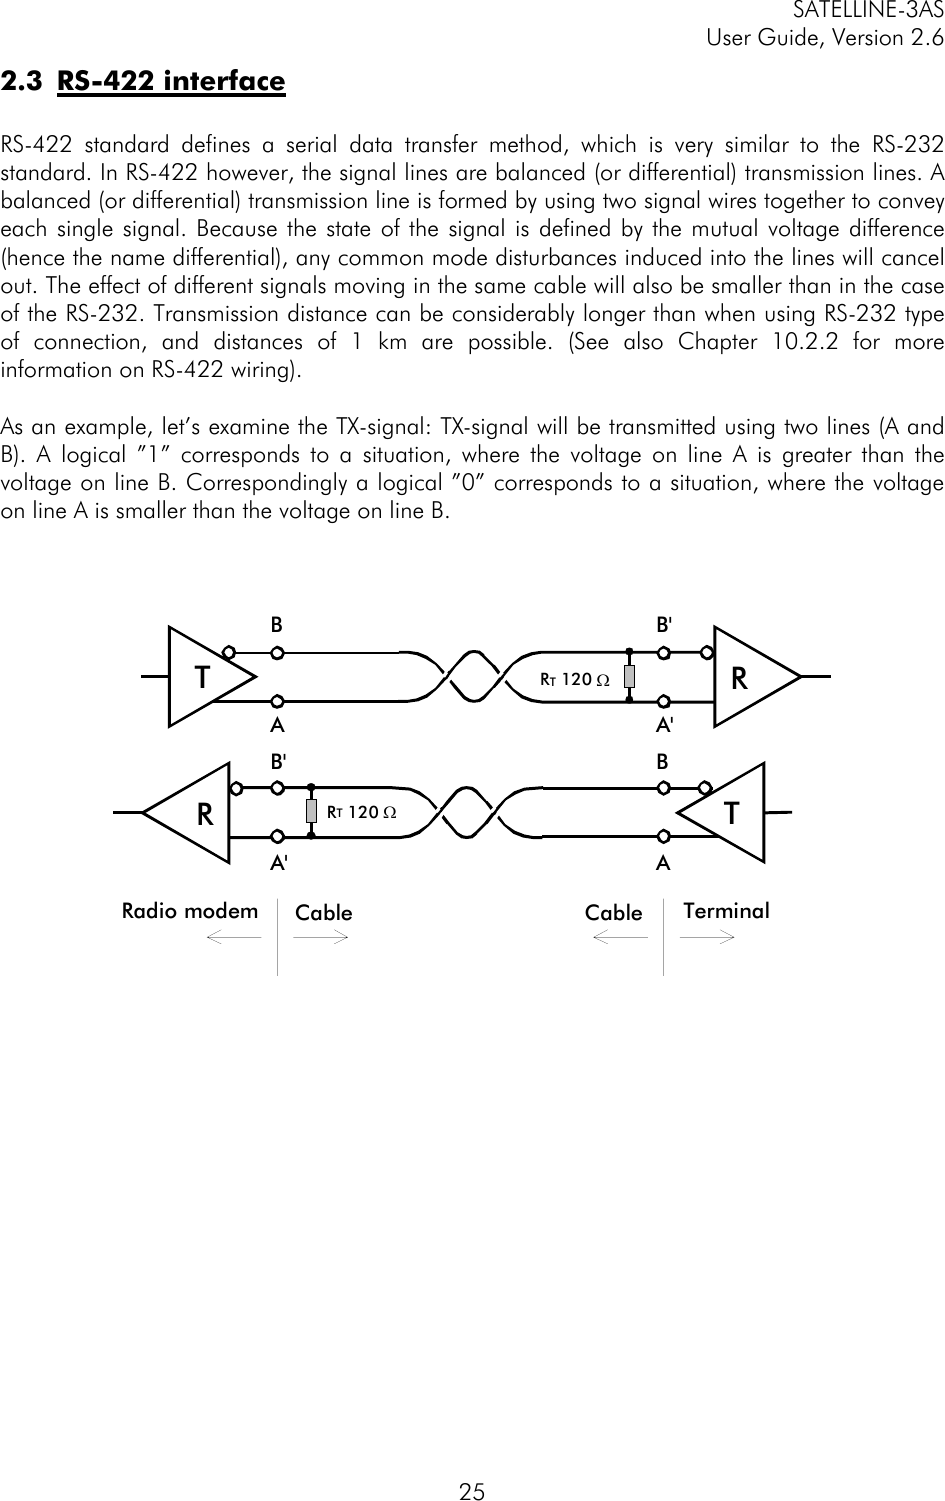 SATELLINE-3AS User Guide, Version 2.6   252.3 RS-422 interface  RS-422 standard defines a serial data transfer method, which is very similar to the RS-232 standard. In RS-422 however, the signal lines are balanced (or differential) transmission lines. A balanced (or differential) transmission line is formed by using two signal wires together to convey each single signal. Because the state of the signal is defined by the mutual voltage difference (hence the name differential), any common mode disturbances induced into the lines will cancel out. The effect of different signals moving in the same cable will also be smaller than in the case of the RS-232. Transmission distance can be considerably longer than when using RS-232 type of connection, and distances of 1 km are possible. (See also Chapter 10.2.2 for more information on RS-422 wiring).  As an example, let’s examine the TX-signal: TX-signal will be transmitted using two lines (A and B). A logical ”1” corresponds to a situation, where the voltage on line A is greater than the voltage on line B. Correspondingly a logical ”0” corresponds to a situation, where the voltage on line A is smaller than the voltage on line B.  RT  120 ΩRTRT  120 ΩRTBB&apos;AA&apos;B&apos; BA&apos; ARadio modem Cable TerminalCable